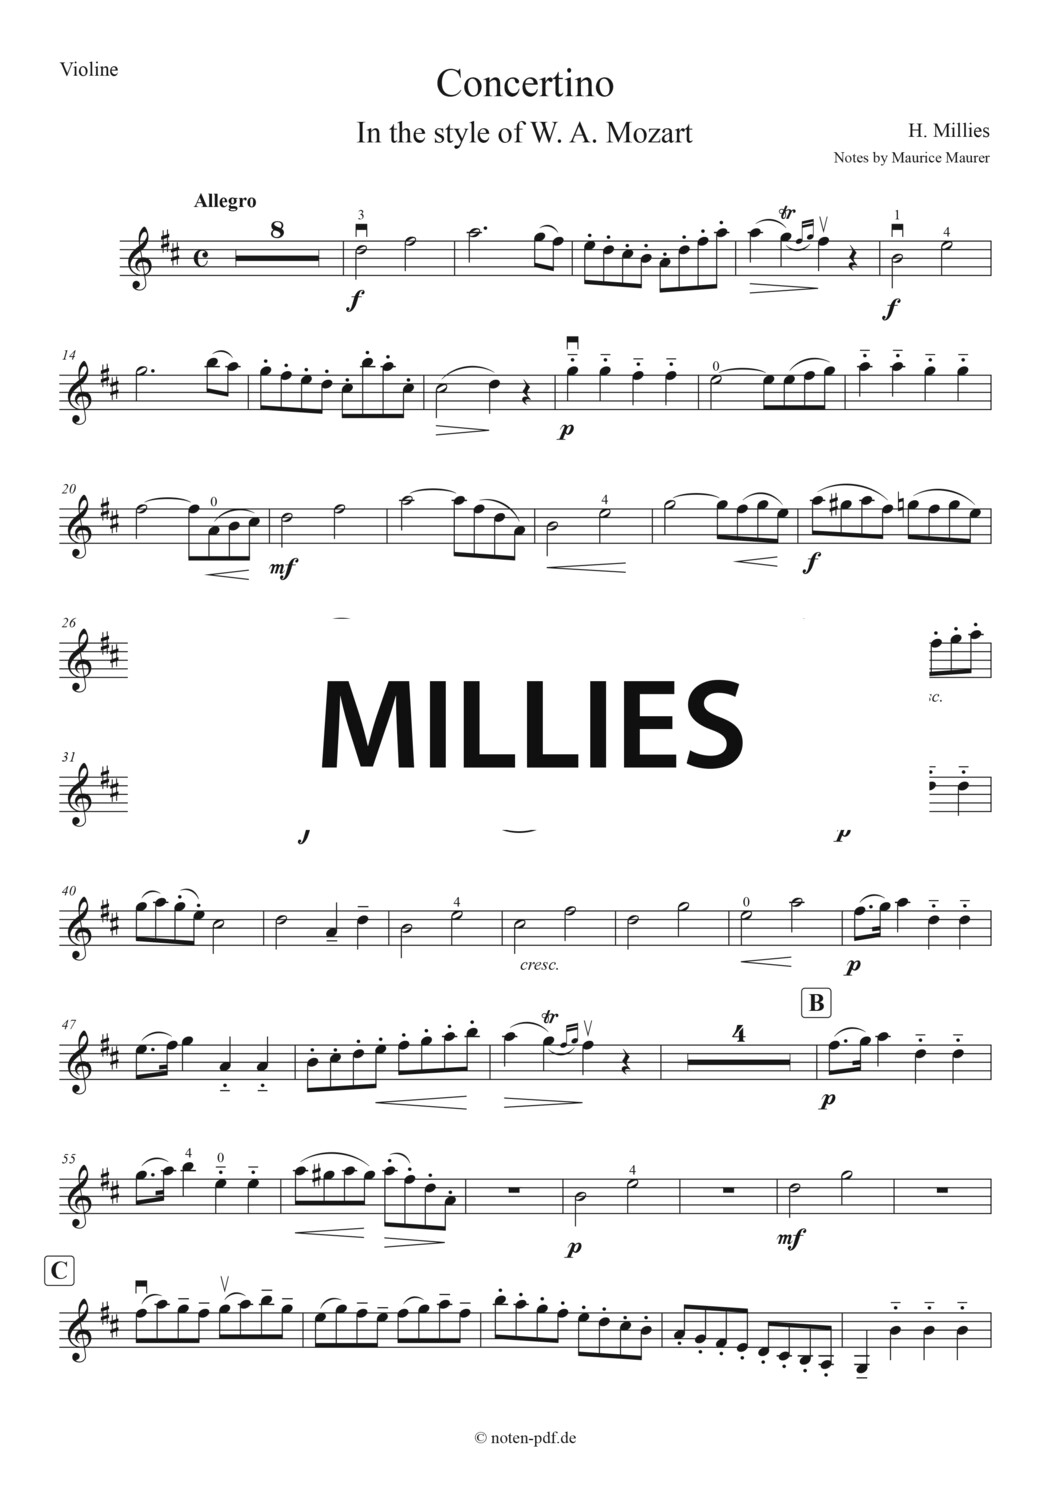 Millies: Concertino - In the style of Mozart - 1. Movement